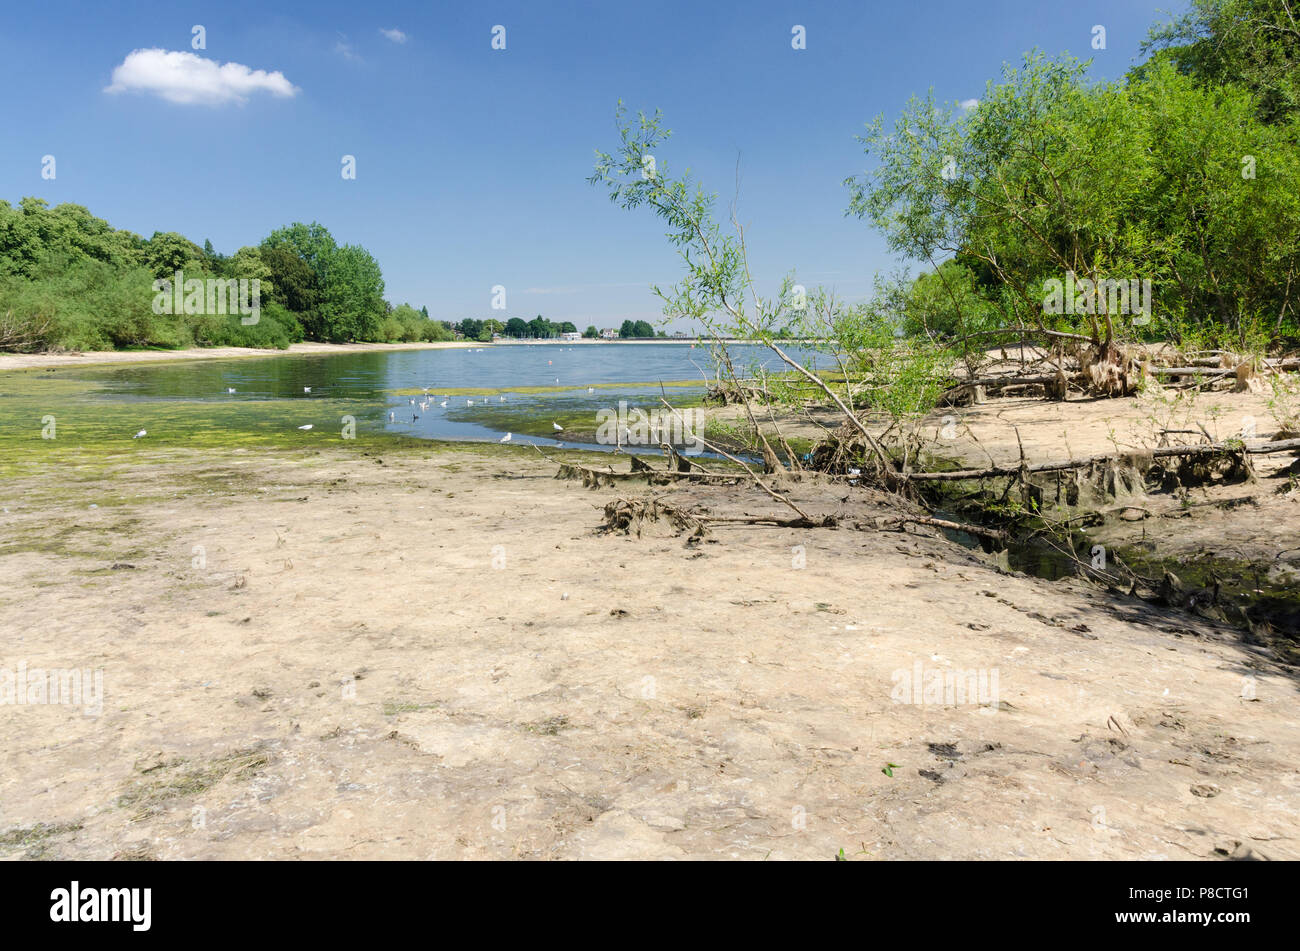 Edgbaston,Birmingham, UK. 11th July 2018. The continued dry weather in Birmingham has caused very low water levels at Edgbaston Reservoir which feeds the canal network. Credit: Nick Maslen/Alamy Live News Stock Photo